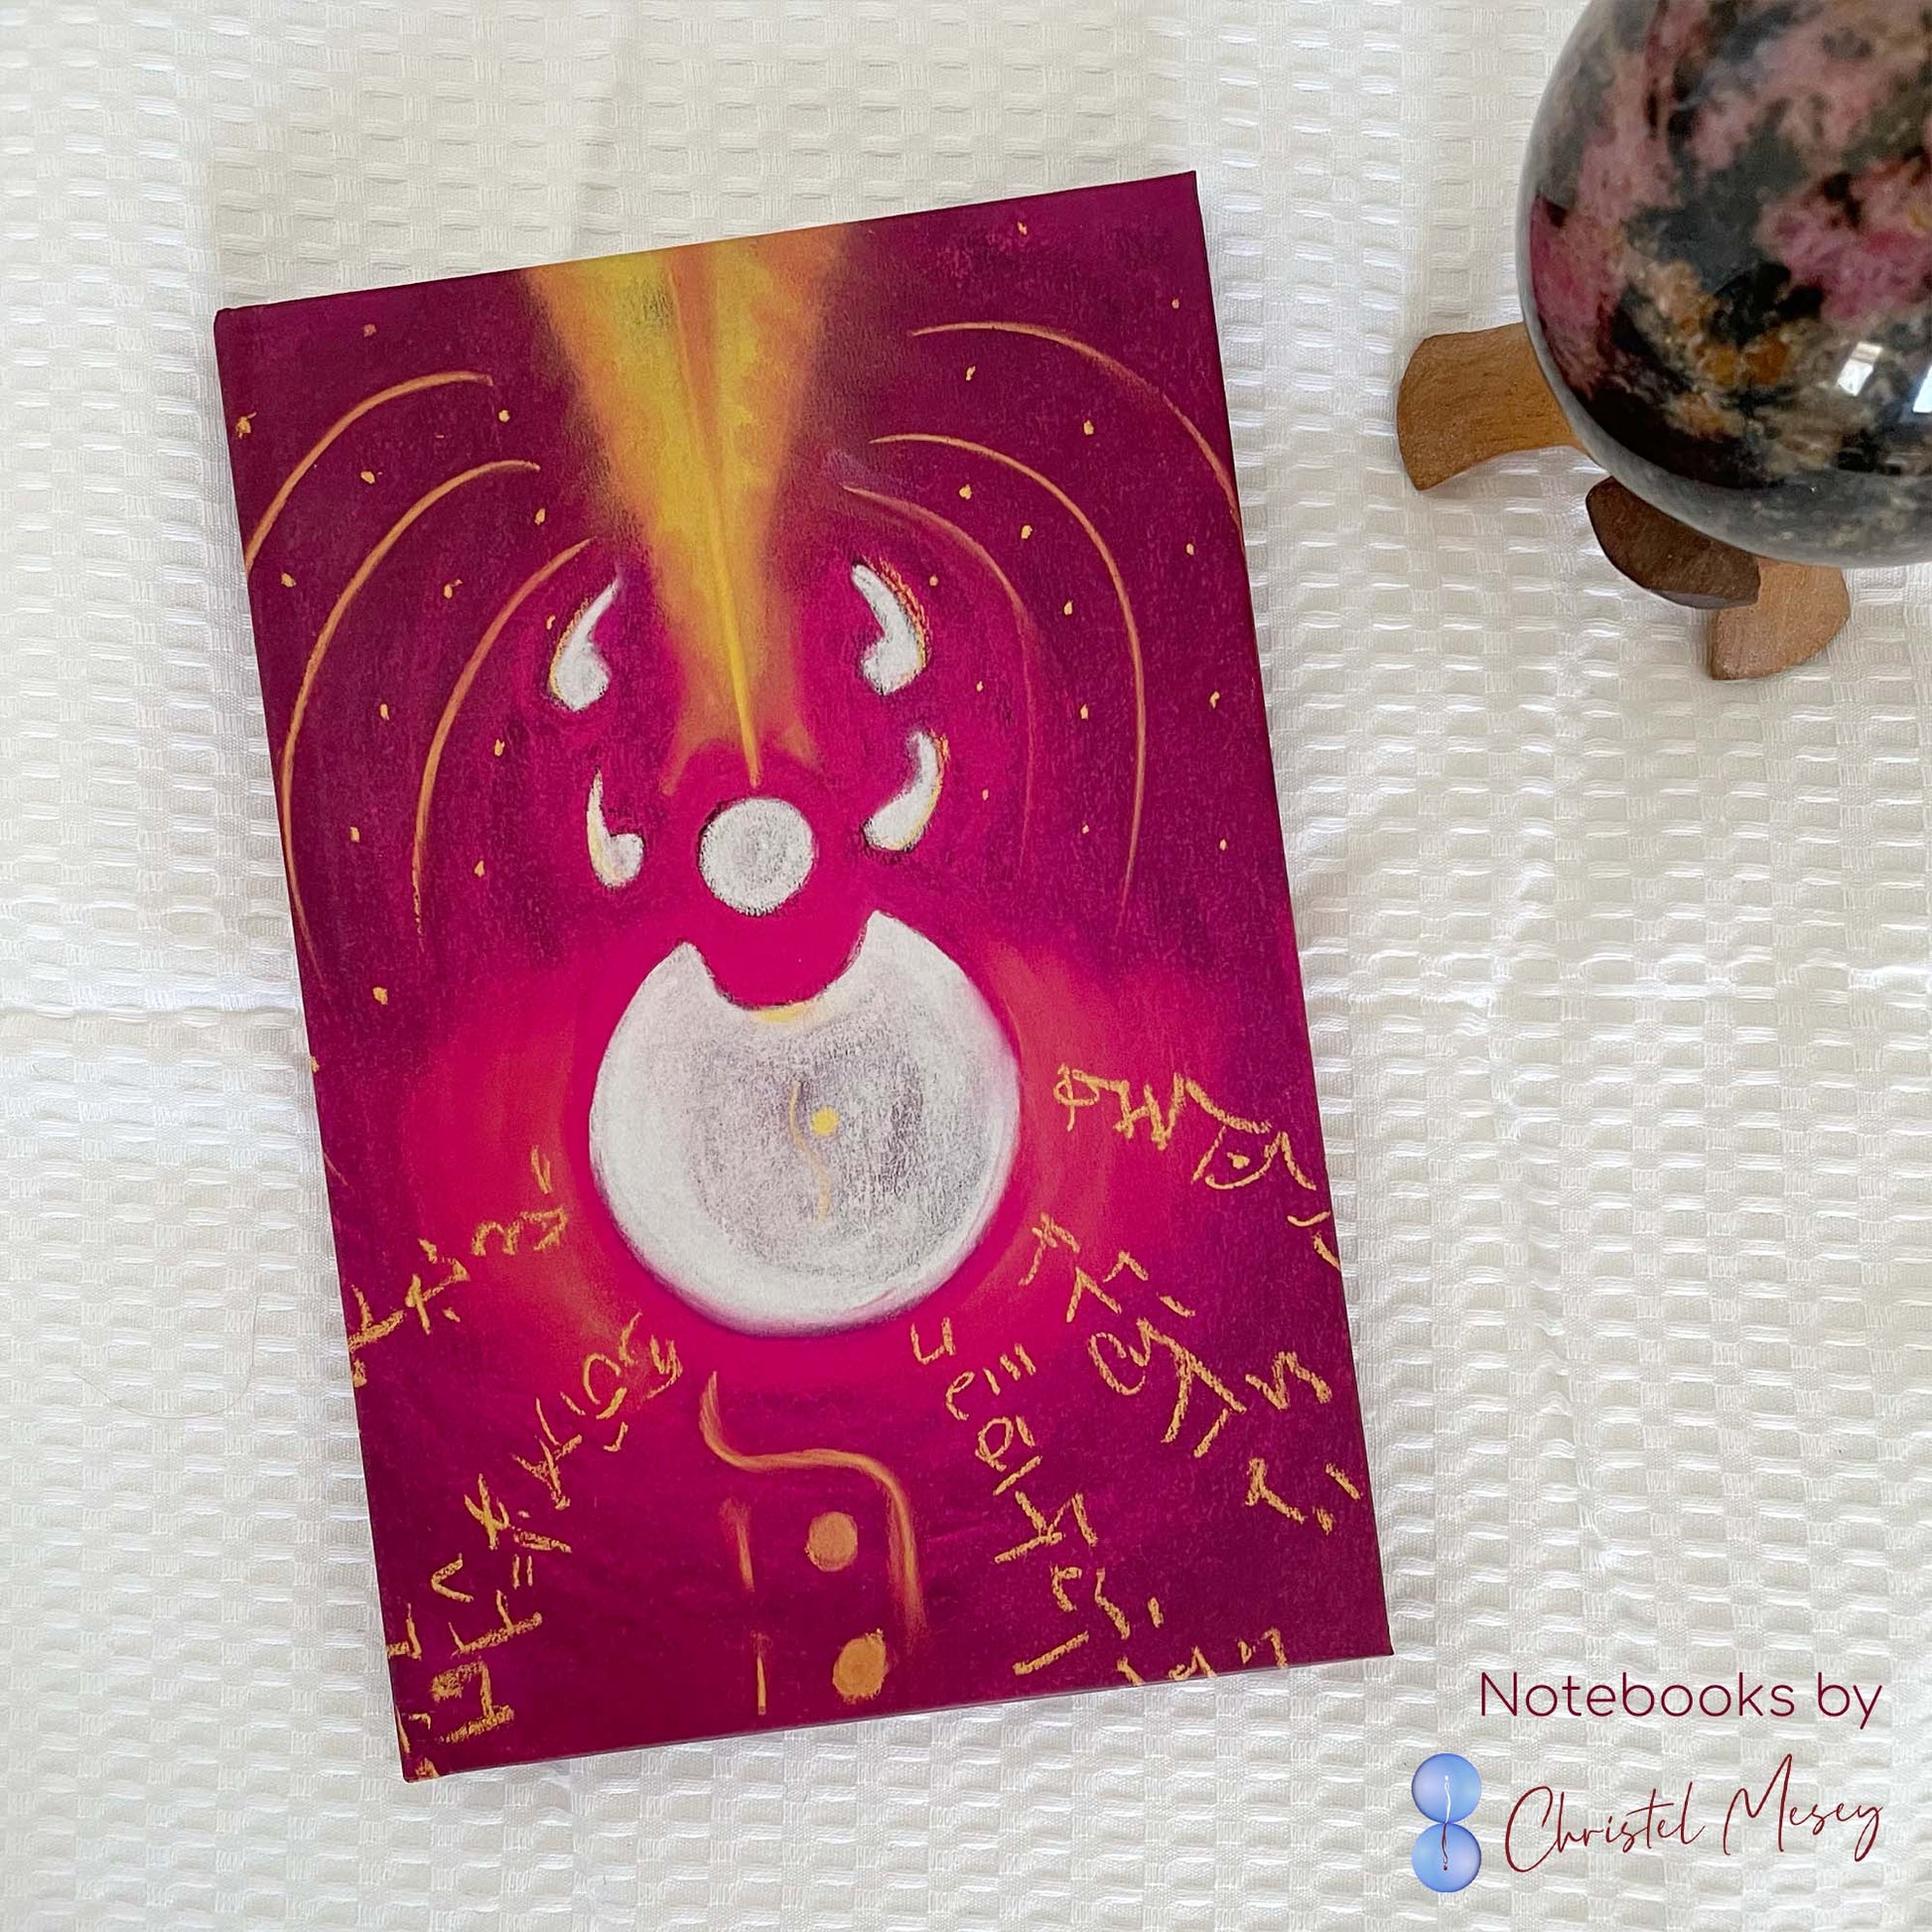 Cosmic Spider - Notebook - Hardcover & dotted pages - Christel Mesey Art